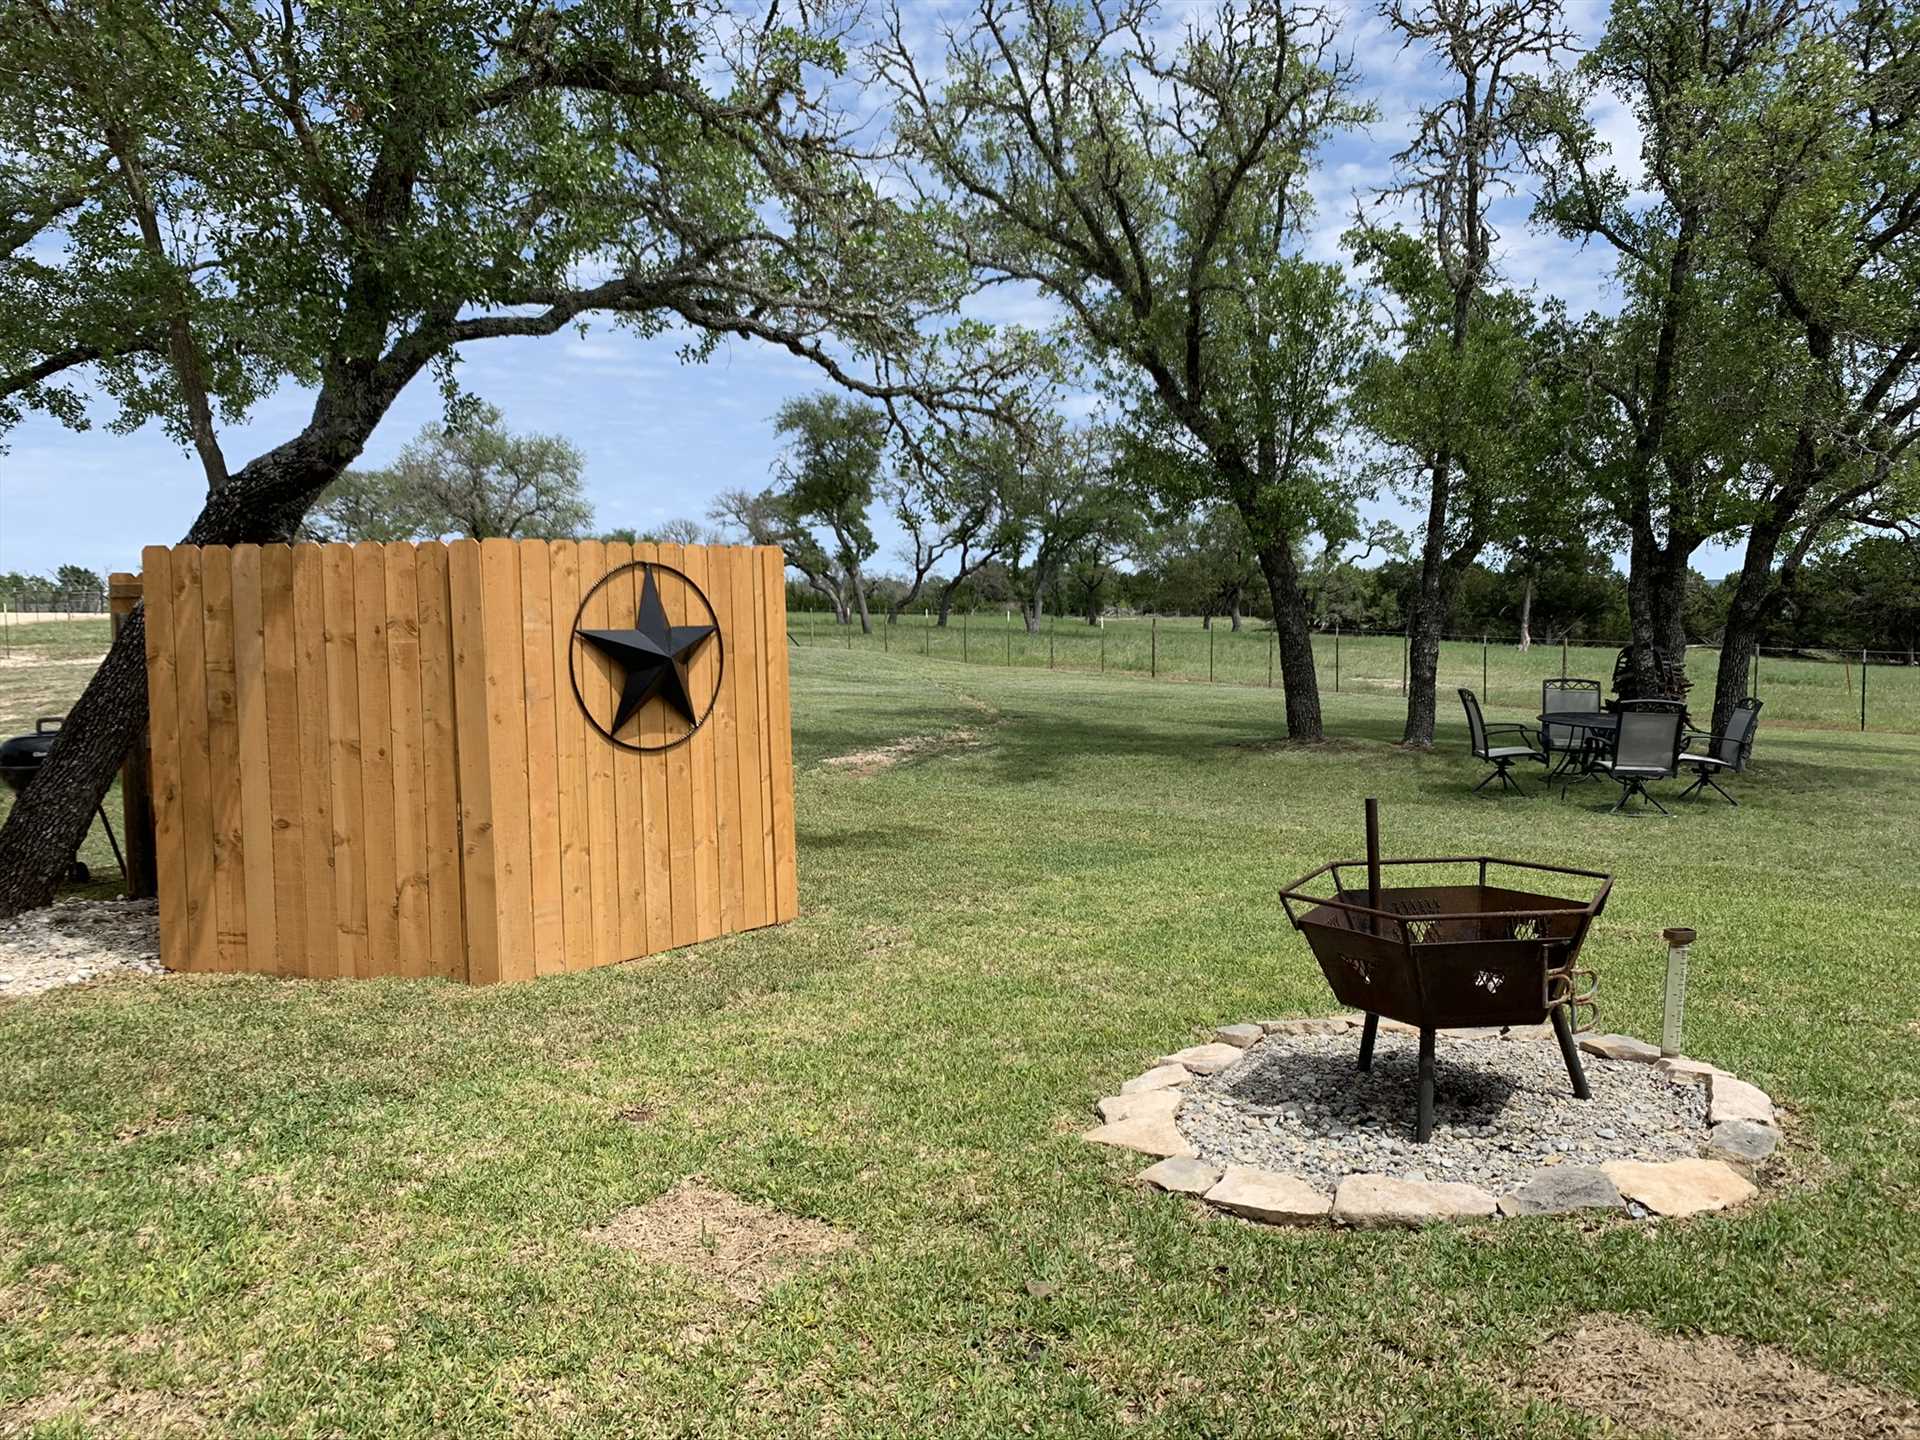                                                 A fire pit and charcoal grill out back make it easy to cook up something special outside! There are also corn hole bags and boards, and a telescope for checking out the Milky Way.